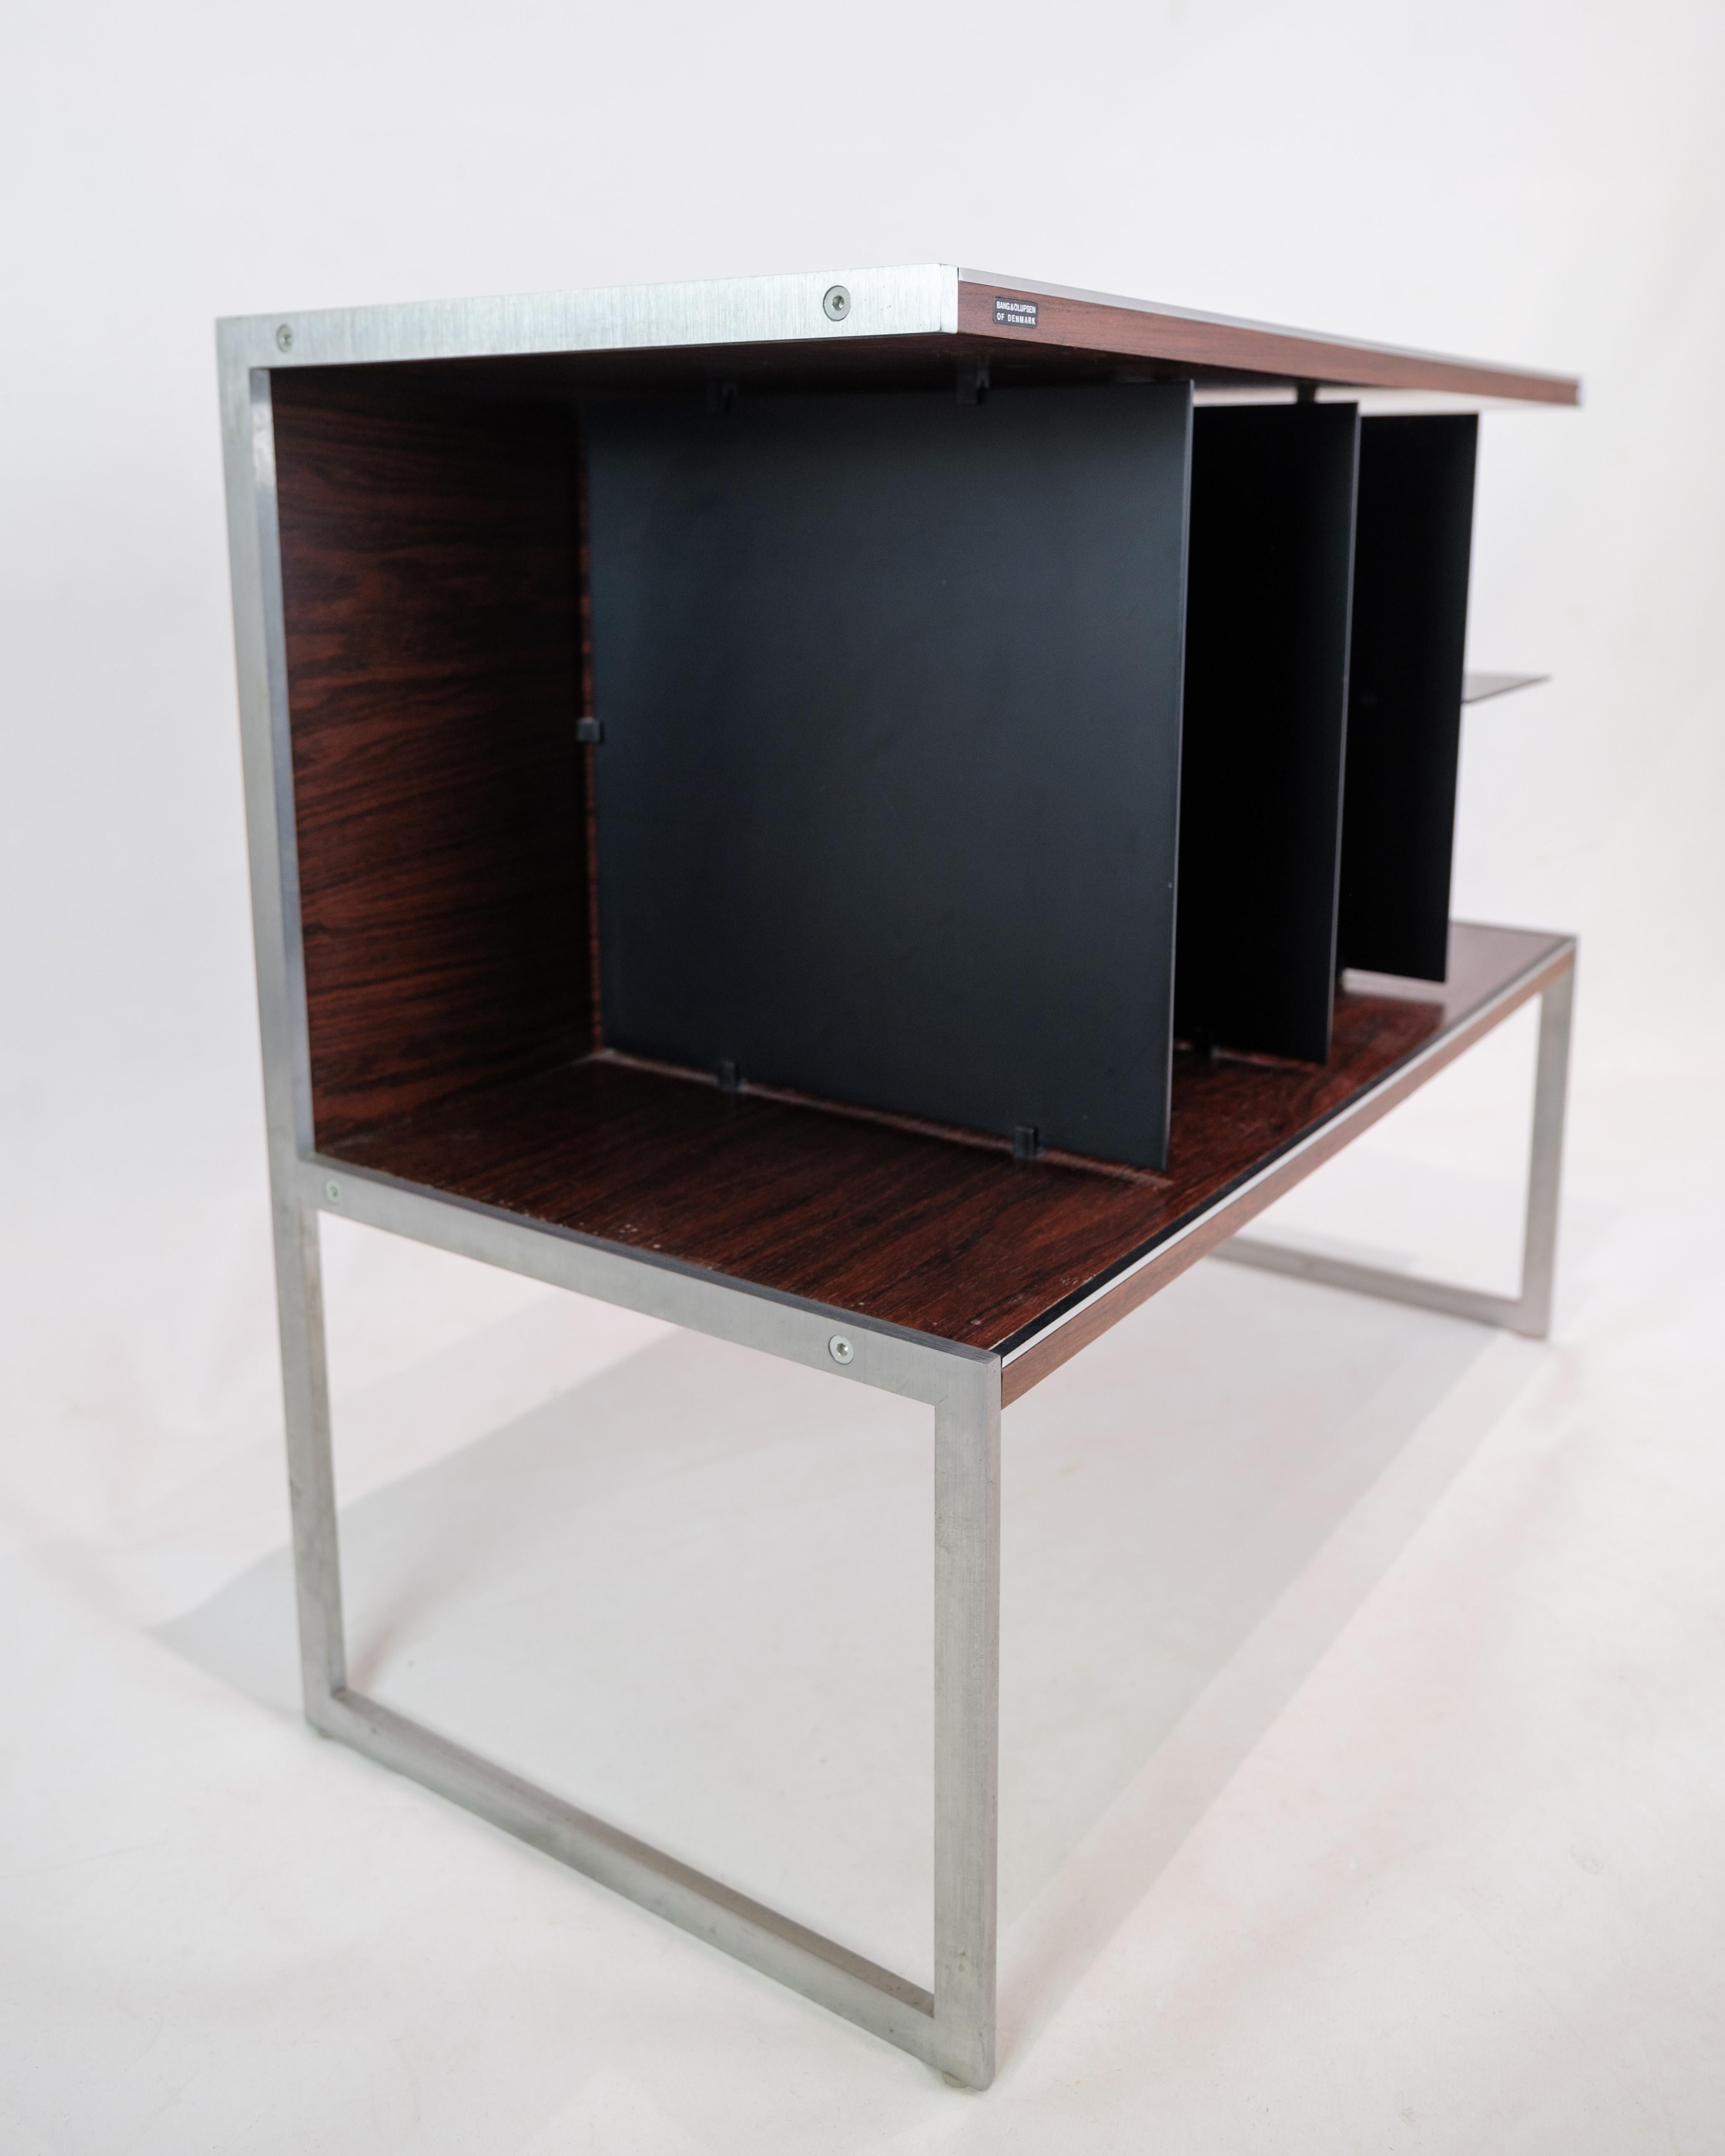 This TV unit or side table, designed by Jacob Jensen in collaboration with Bang & Olufsen, is a splendid example of the modern aesthetics and functionality of the 1970s. Made of rosewood and aluminum, this piece of furniture exudes a unique blend of